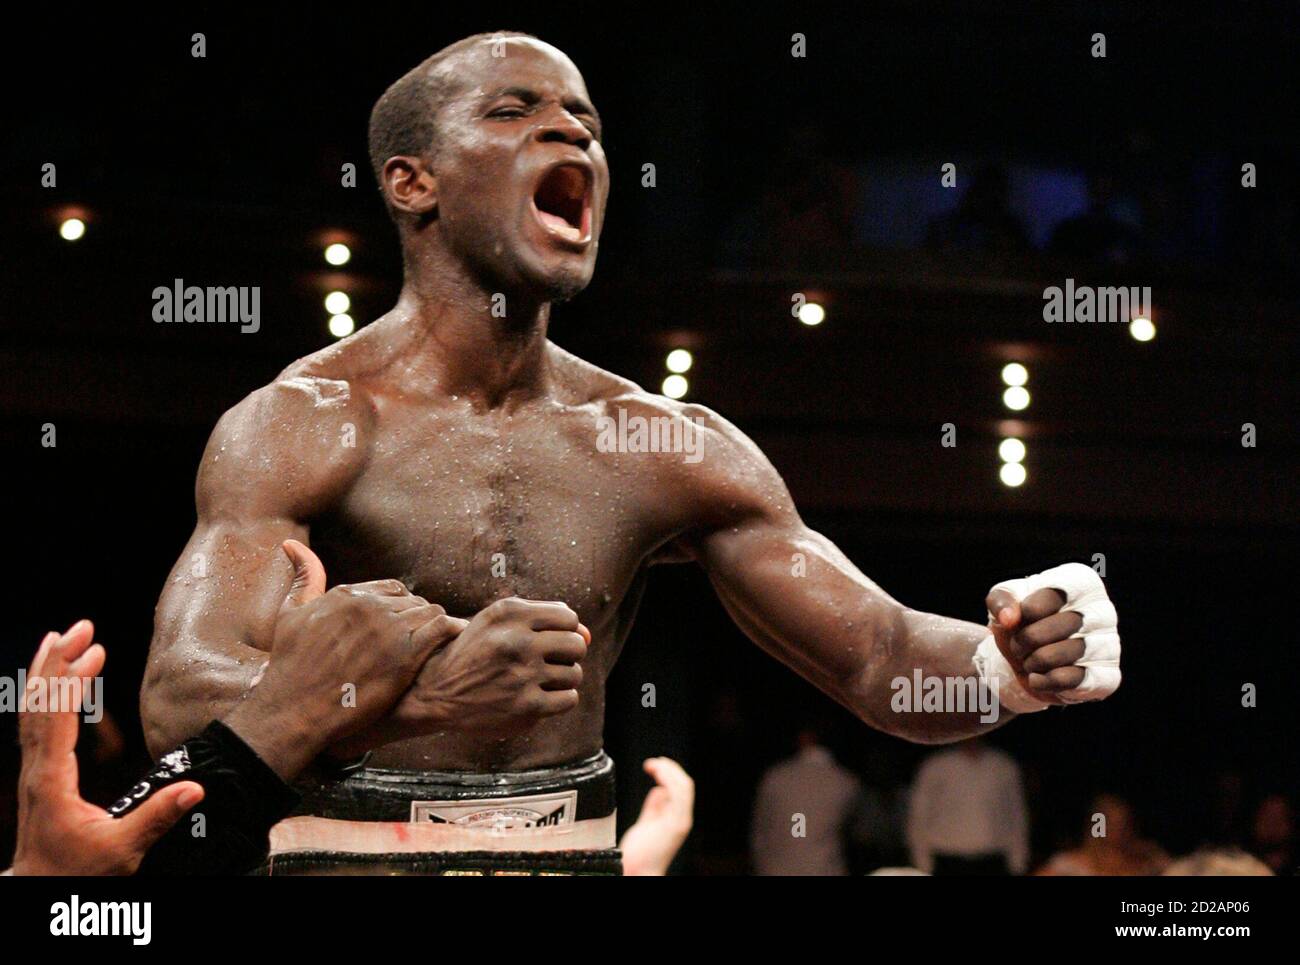 Joshua Clottey of Ghana yells after beating Zab Judah of the U.S. following their IBF welterweight title fight at the Palms Casino Resort in Las Vegas, Nevada August 2, 2008. REUTERS/Steve Marcus (UNITED STATES) Stock Photo